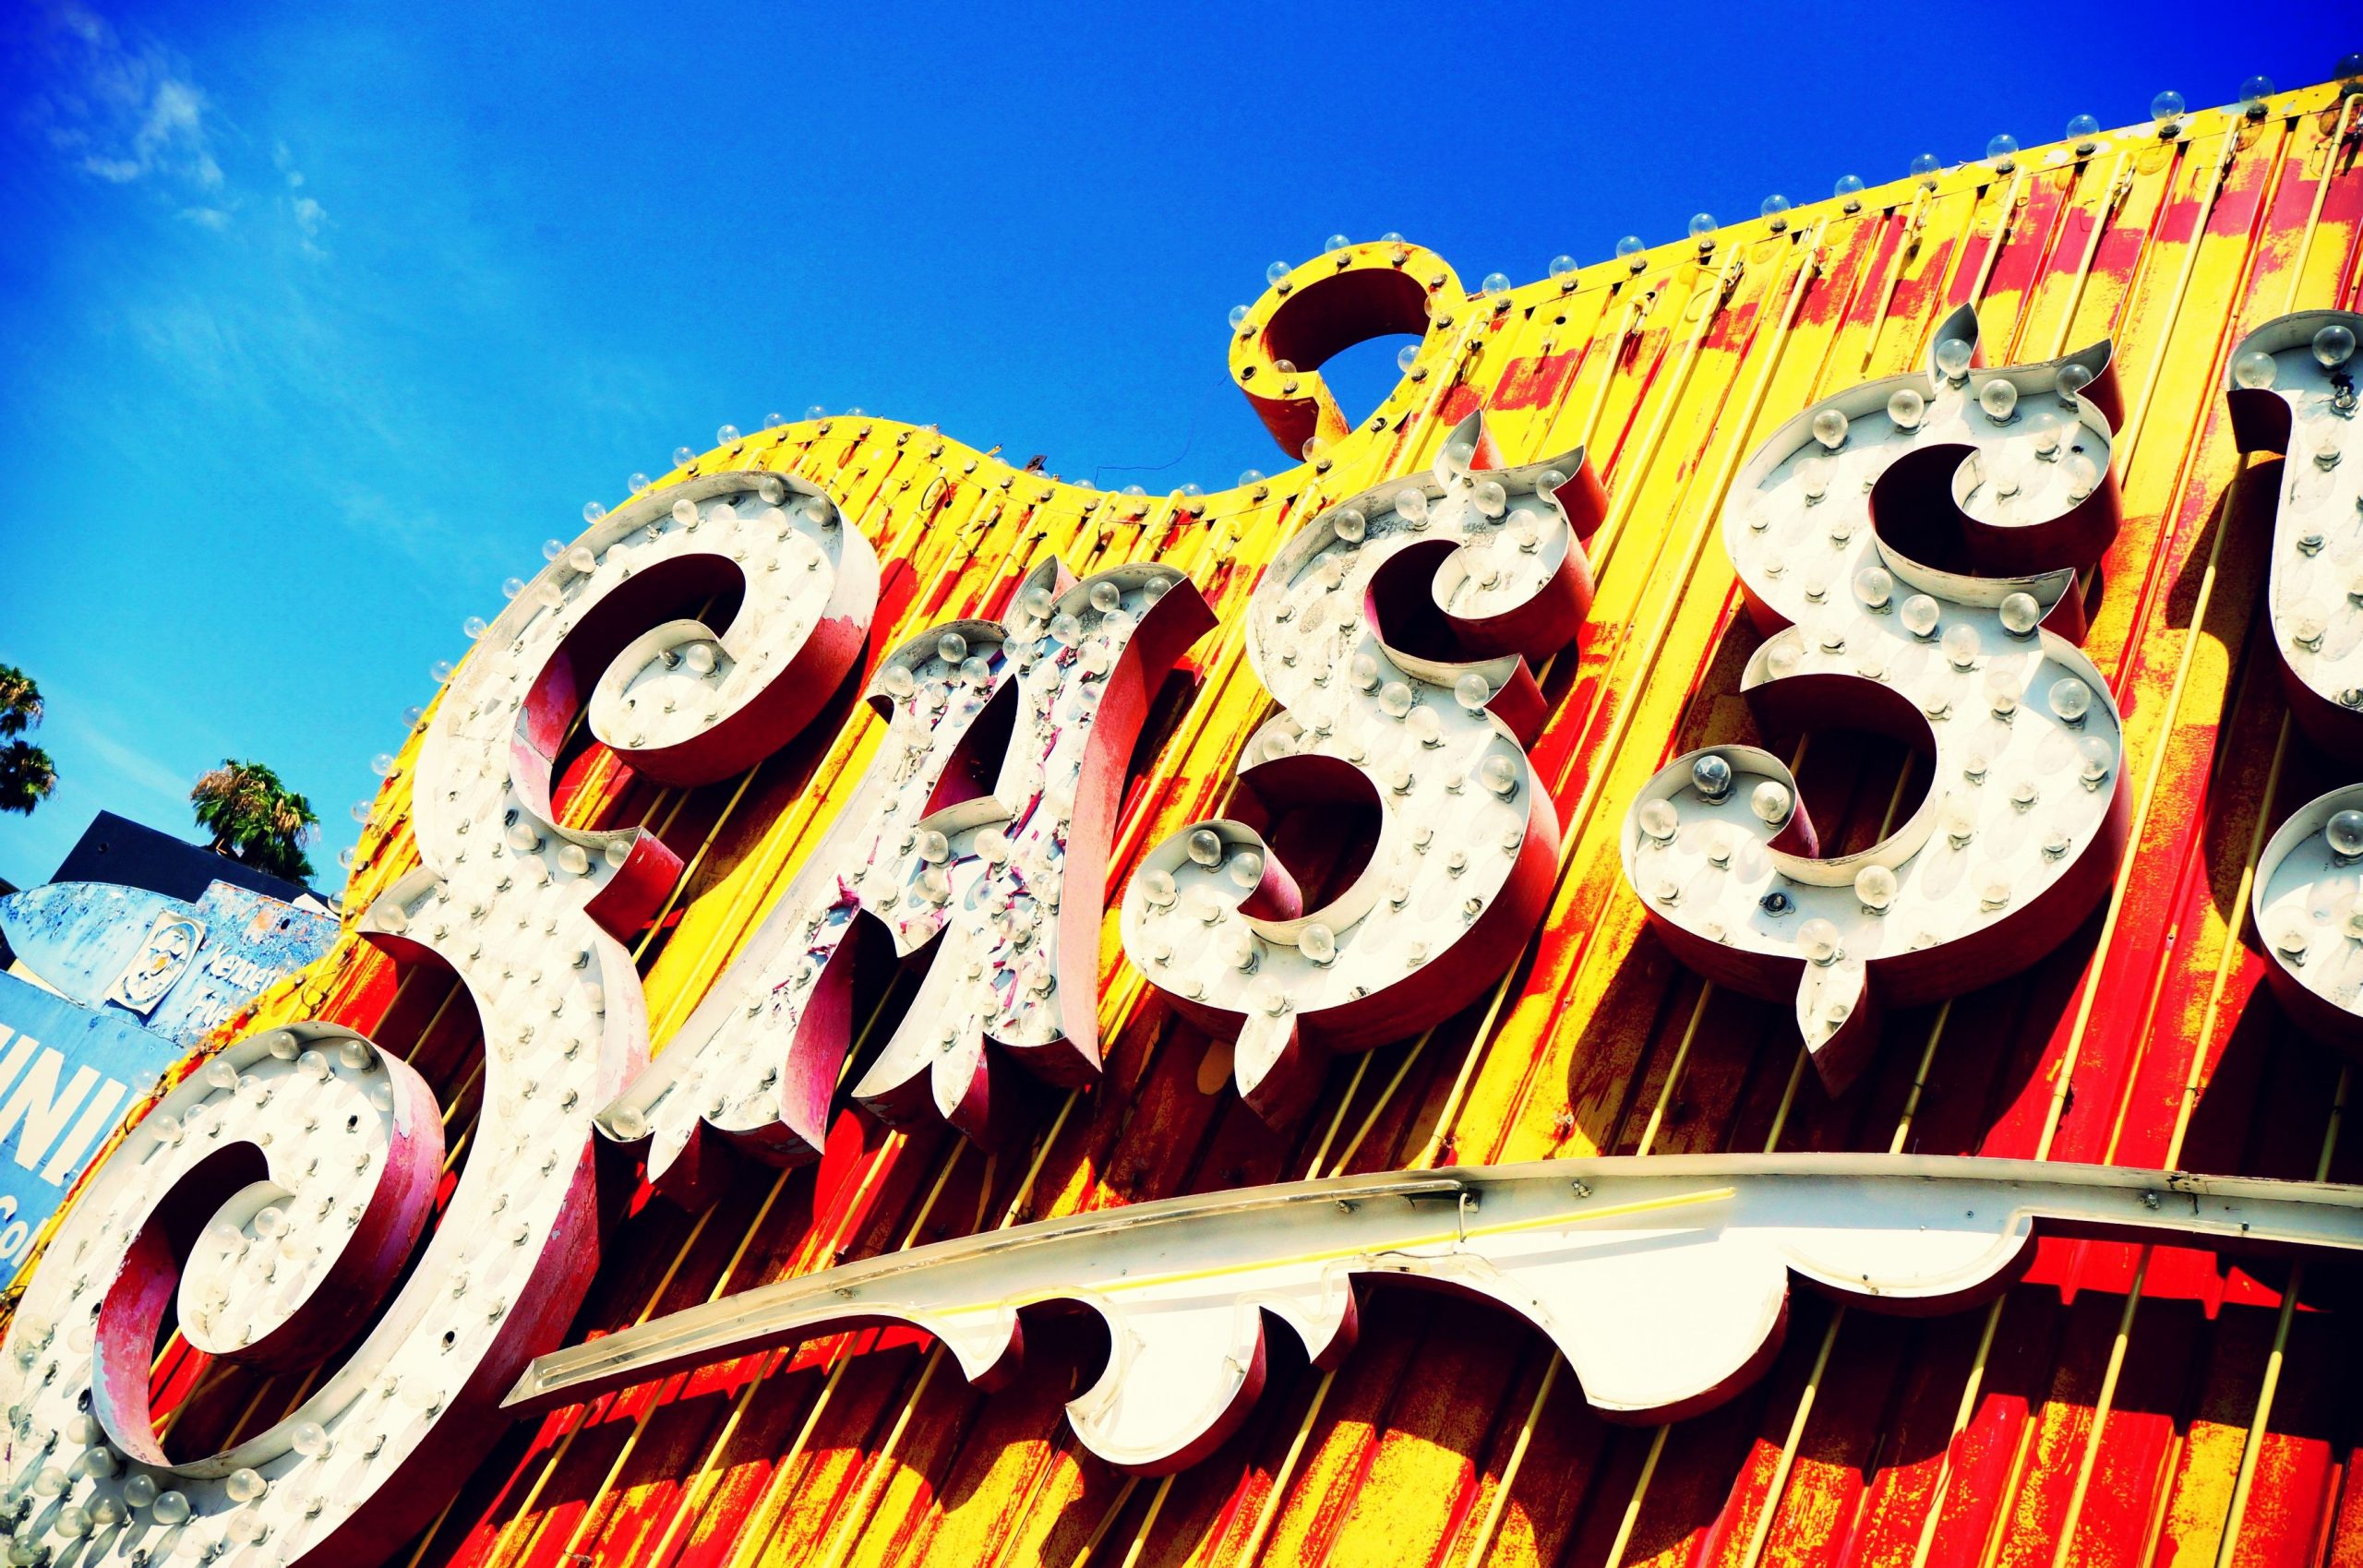 Things to do in Las Vegas during the day